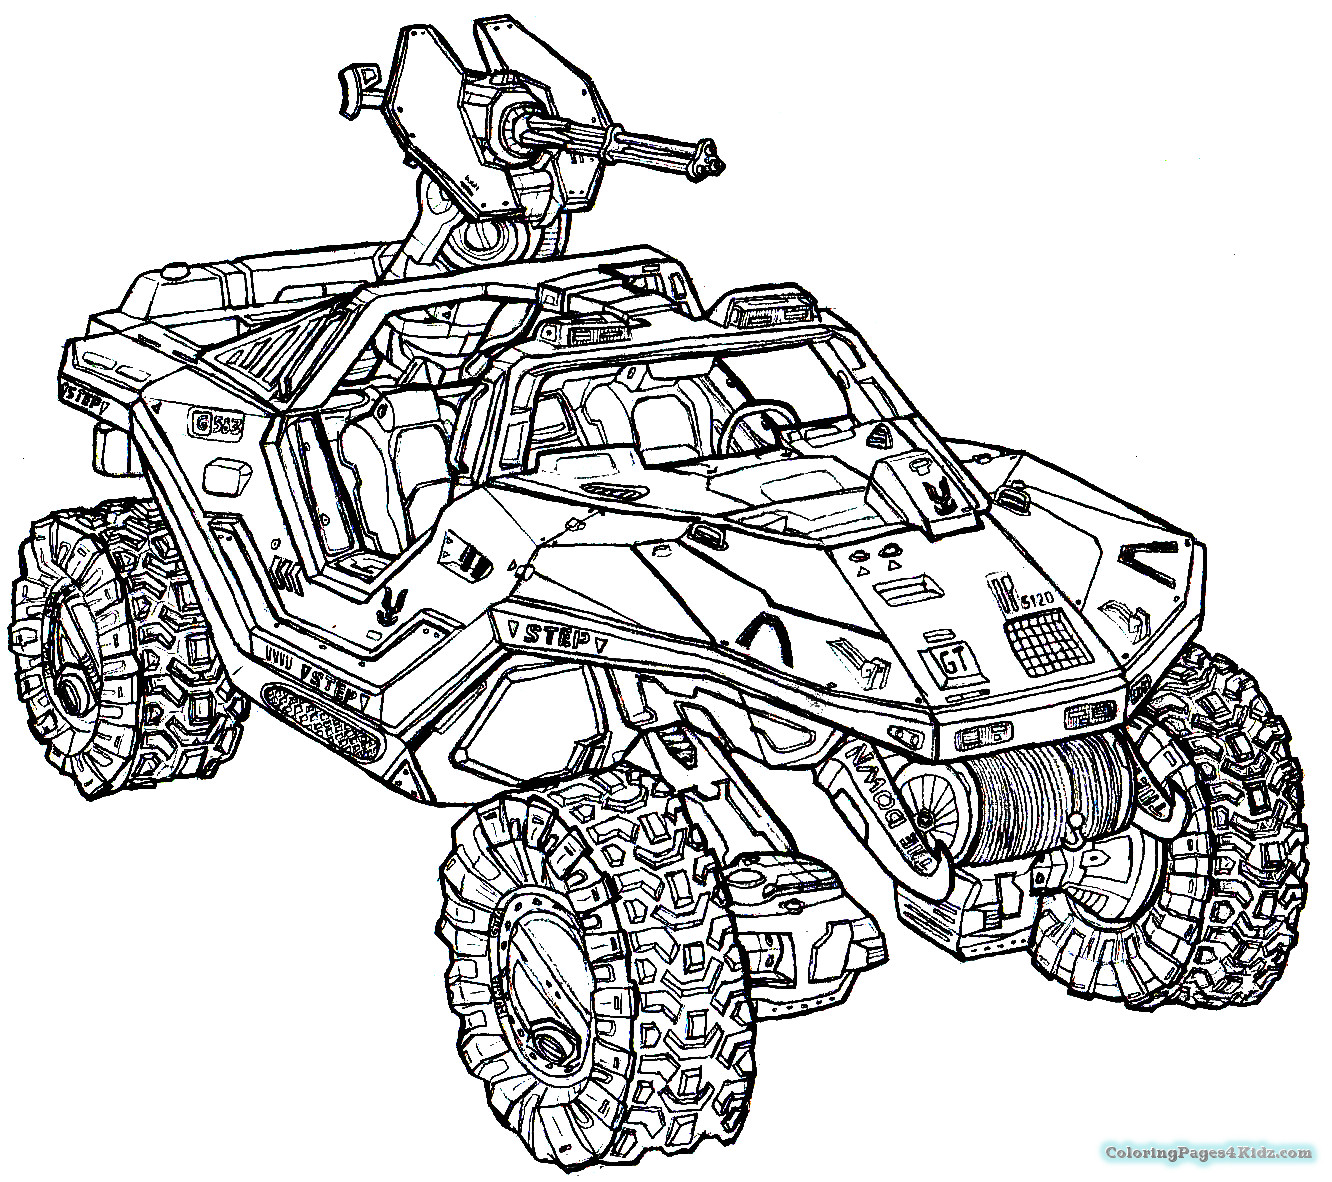 Halo Coloring Book
 Halo 4 Coloring Pages